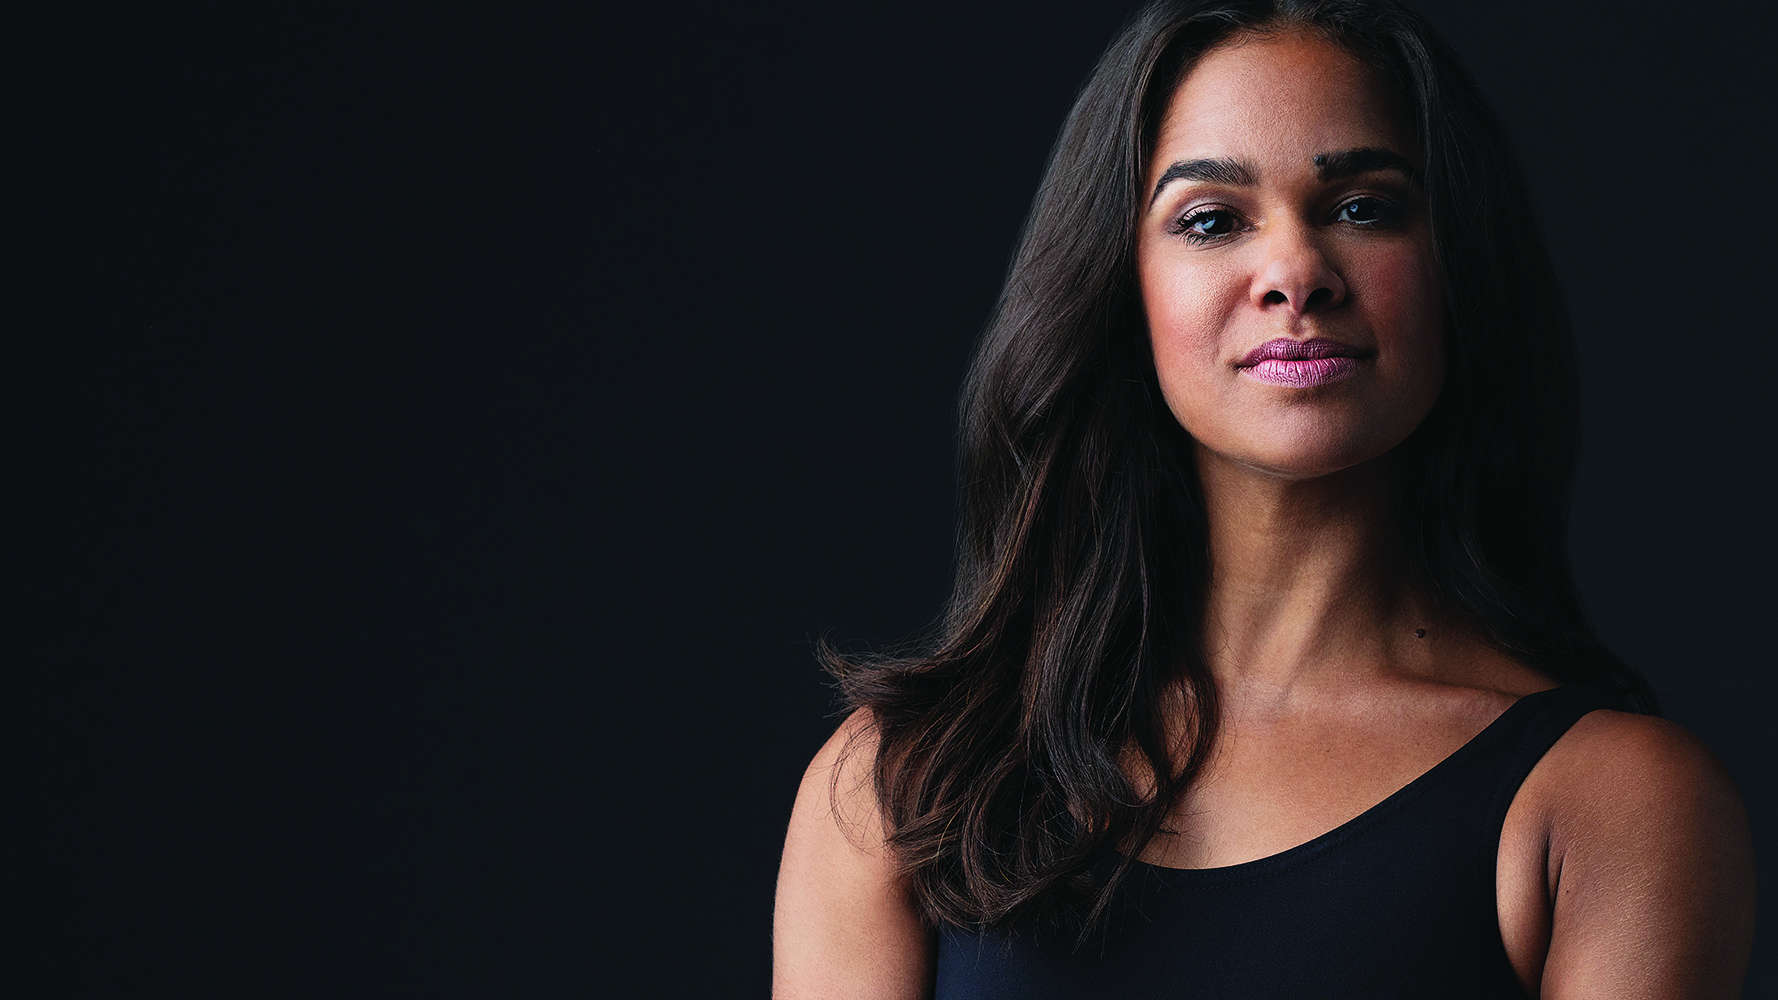 Misty Copeland’s Five Favorite Items At Home